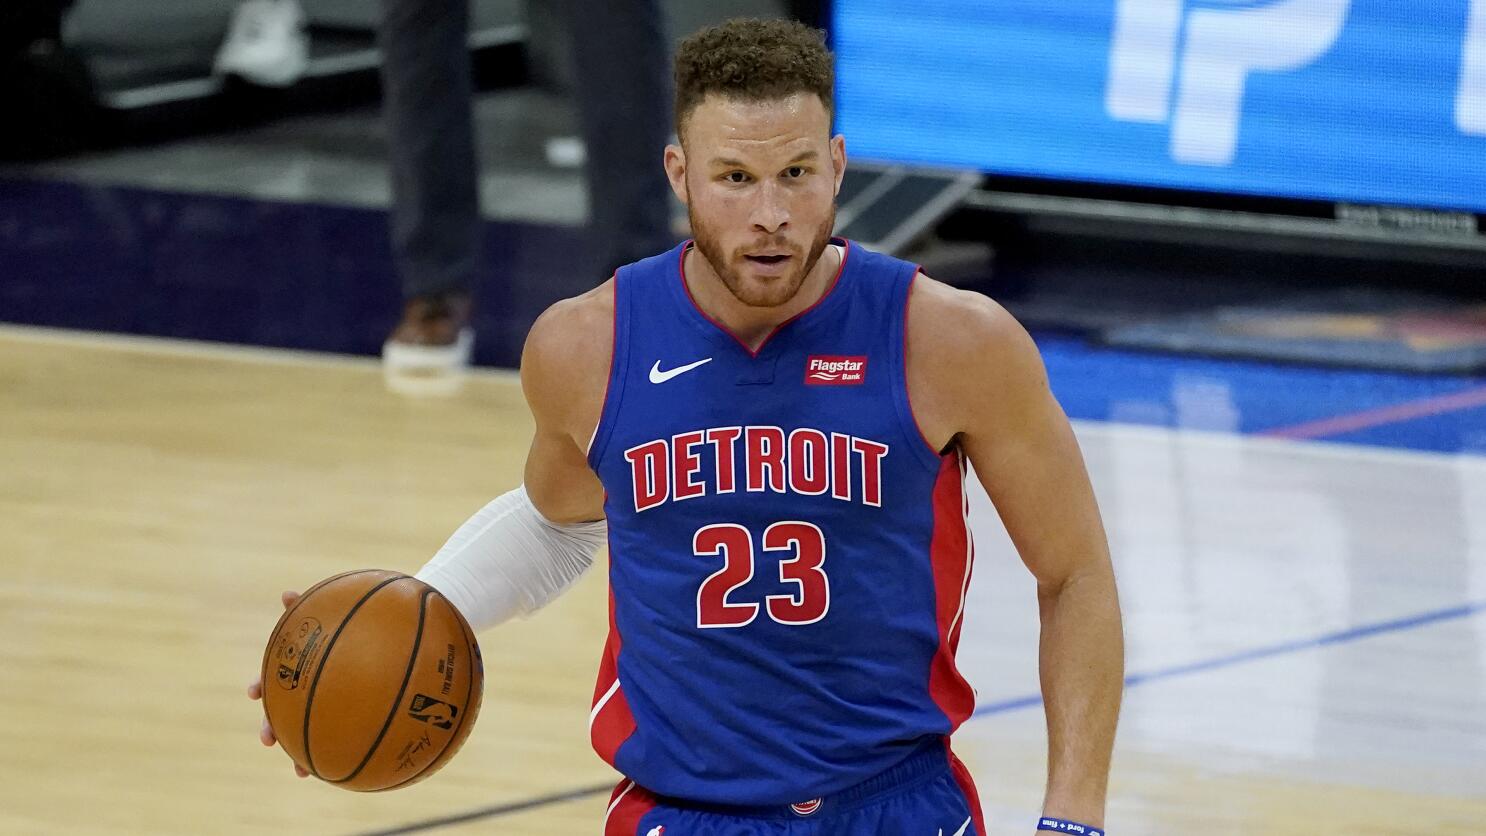 What made the Goin' to Work Detroit Pistons enjoyable to Watch